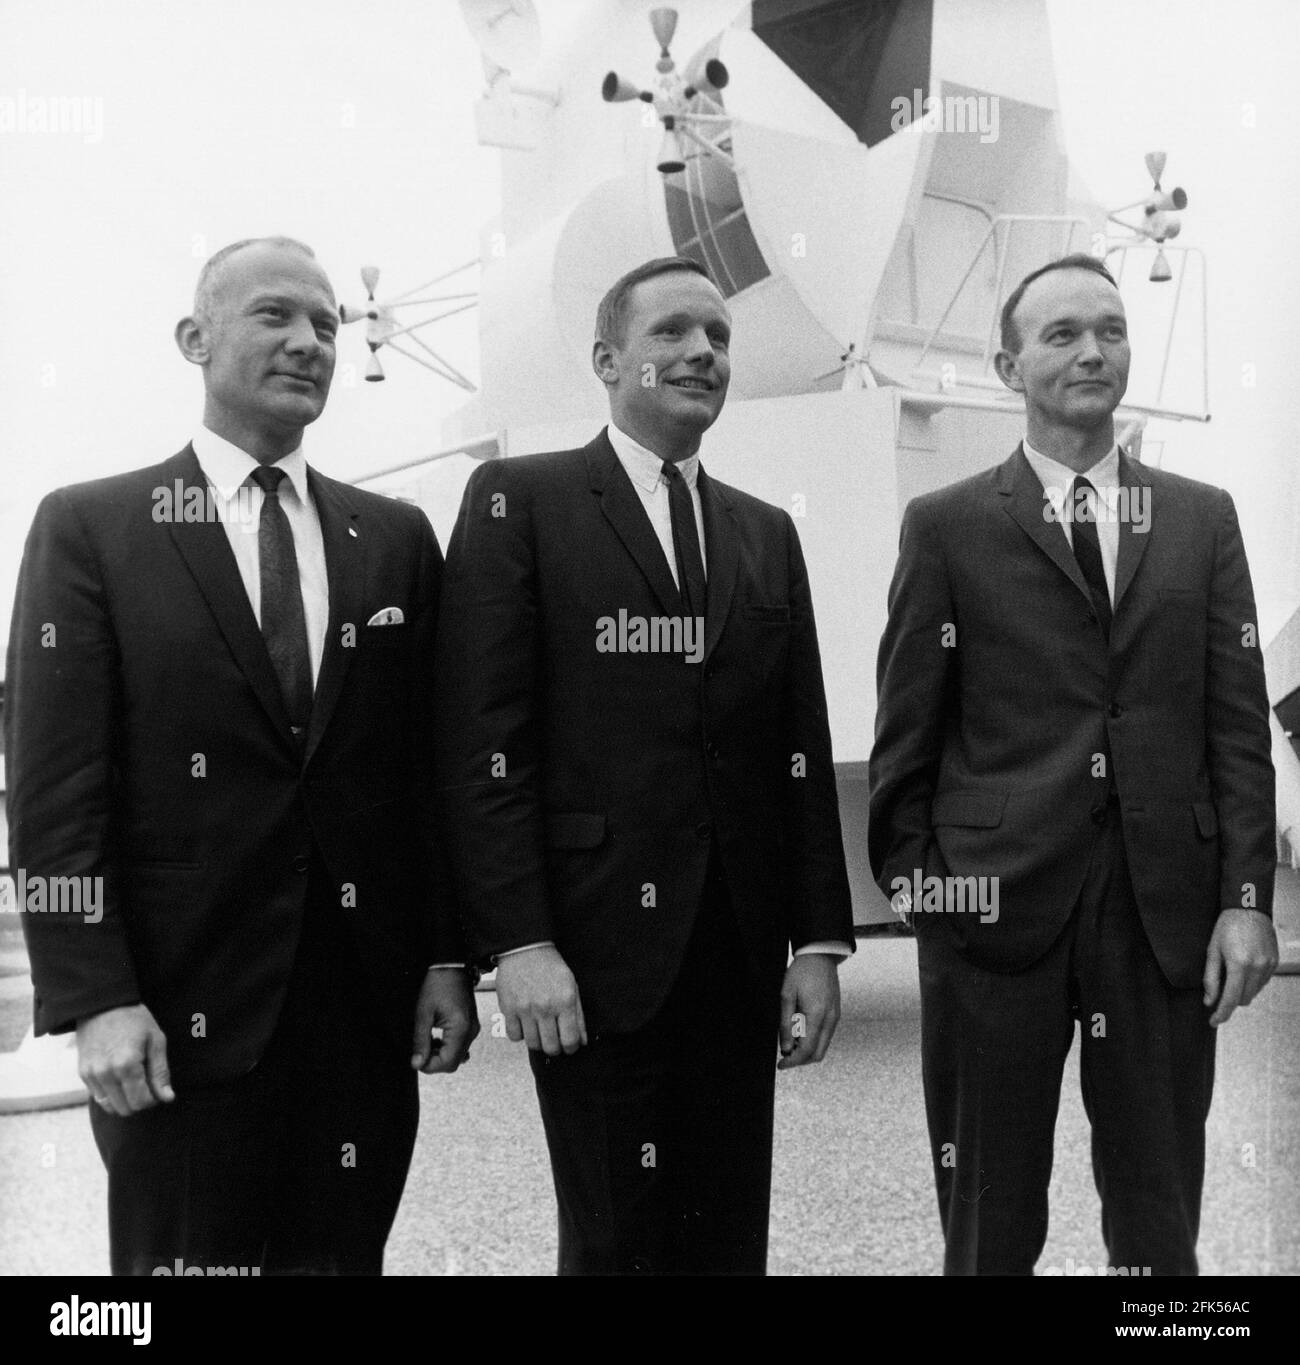 Cape Canaveral, FL - (FILE) -- Apollo 11 Astronauts, left-to-right, Edwin E. 'Buzz' Aldrin, Jr., Neil A. Armstrong, and Michael Collins, pose in front of full-scale lunar module mock-up similar to the spacecraft that took them to the Moon on February 28, 1969.Credit: NASA via CNP /MediaPunch Stock Photo